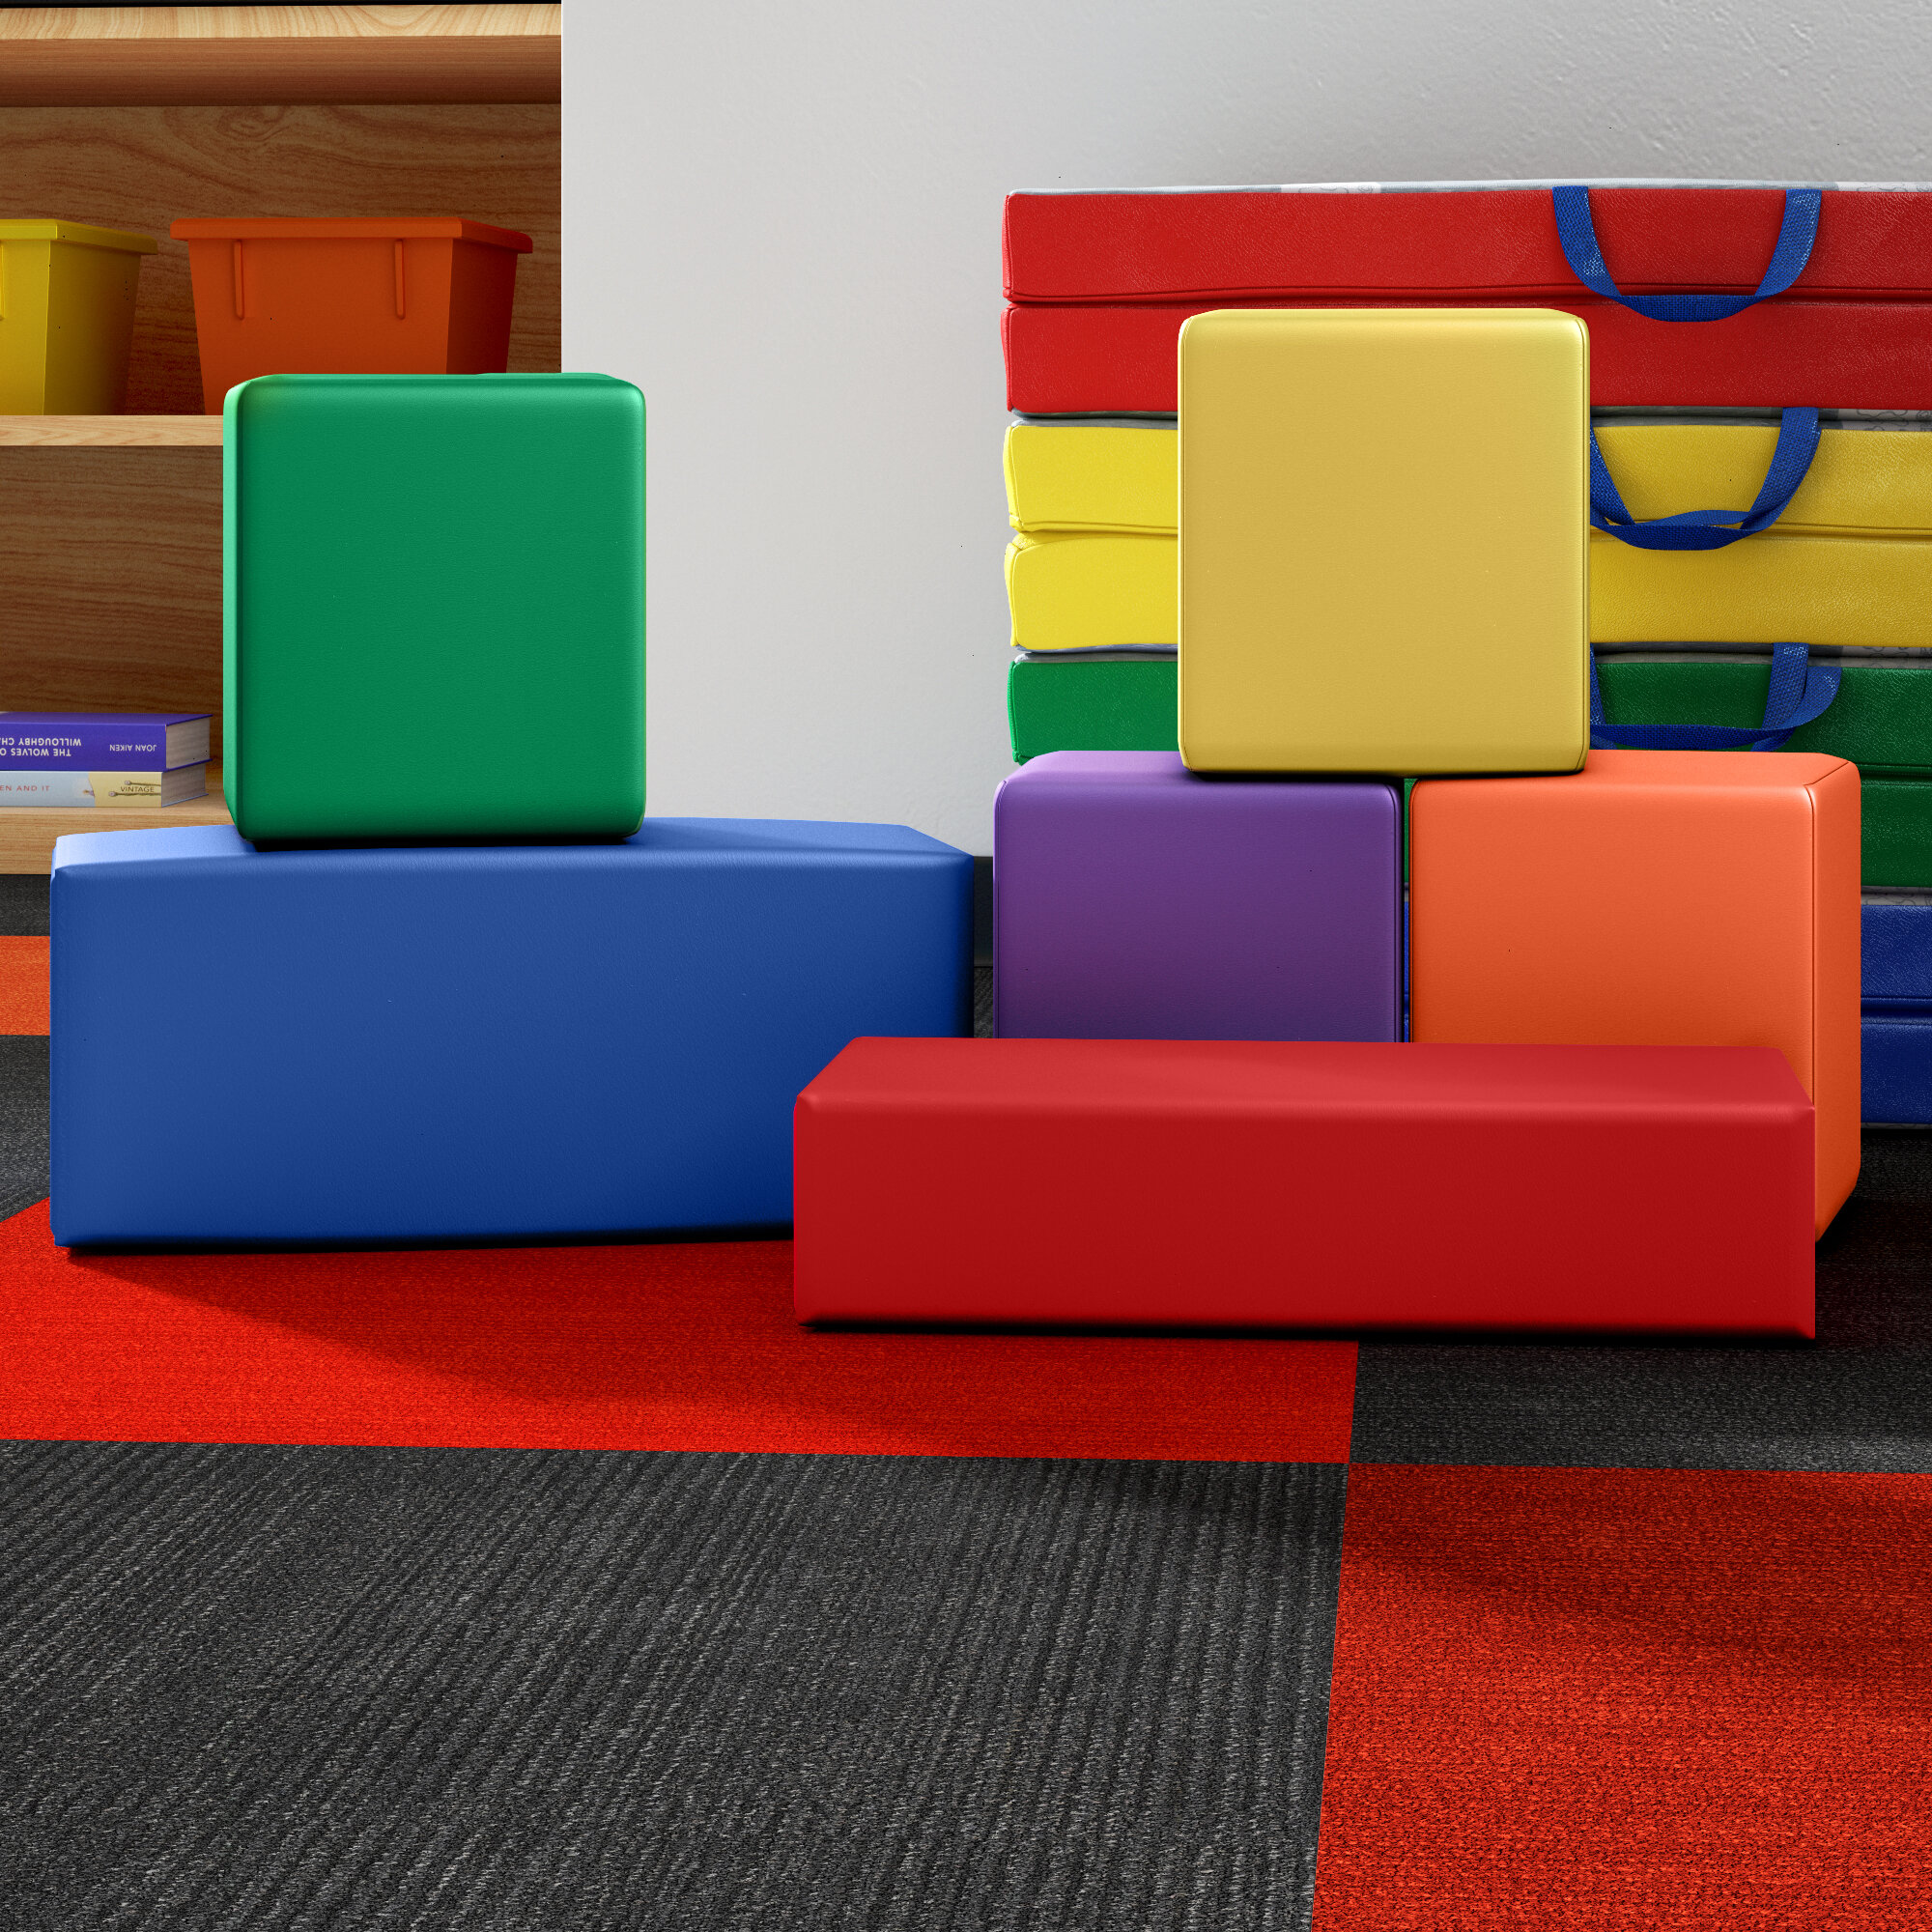 Giant Colorful Foam Block Shapes - FREE Shipping